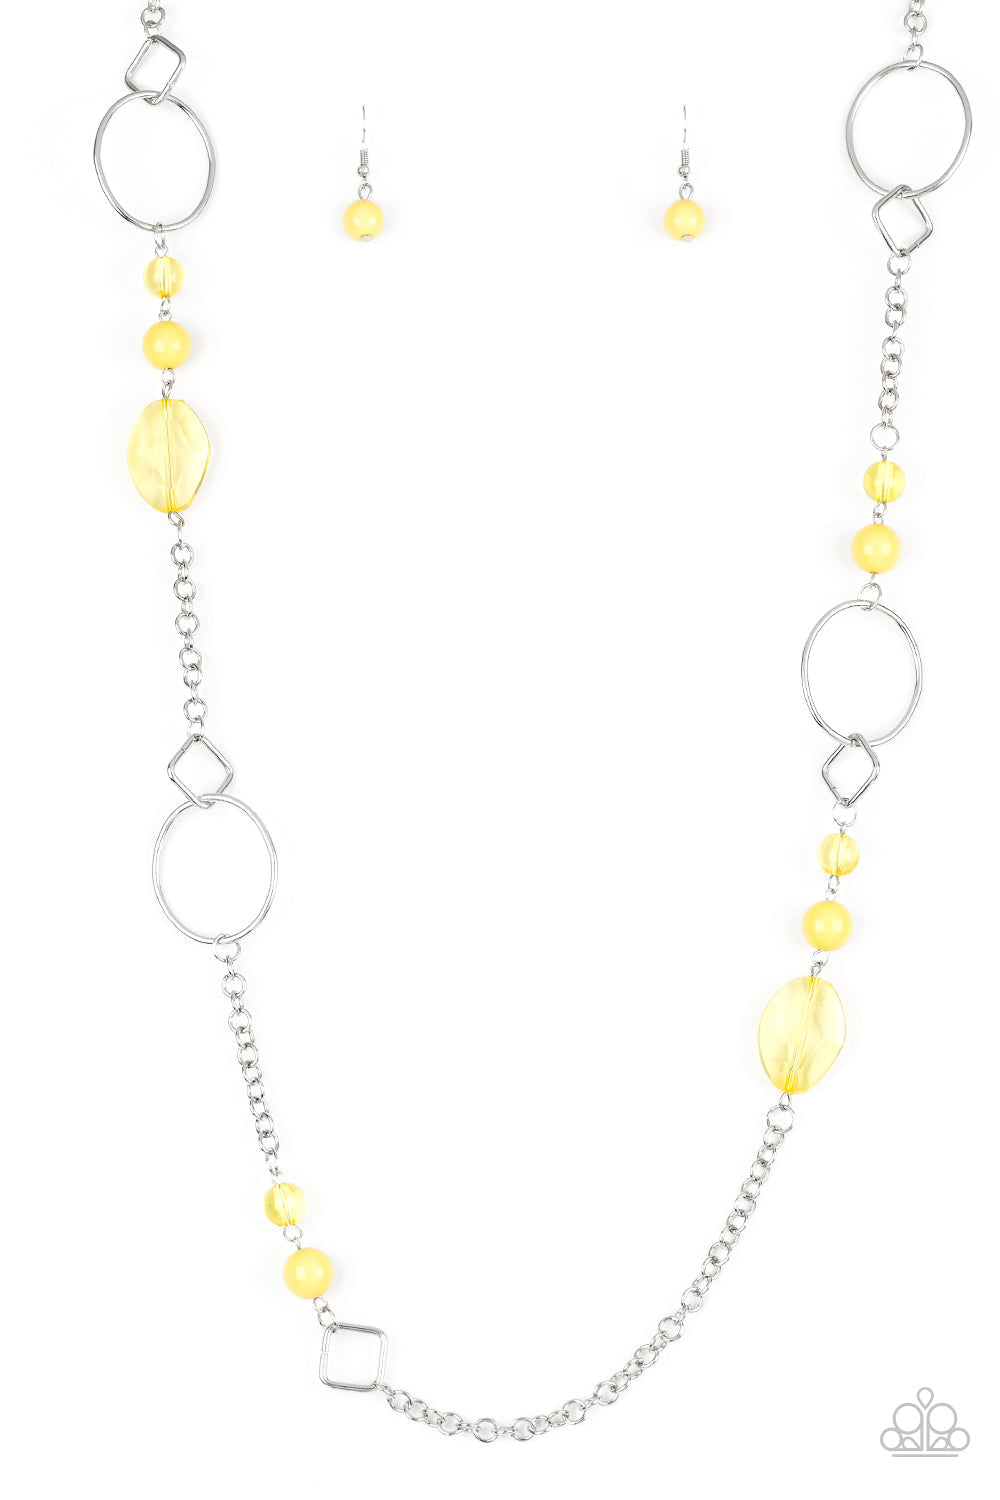 Very Visionary - Yellow and Silver Necklace - Paparazzi Accessories -Polished and glassy yellow beads trickle along a shimmery silver chain featuring round and square frames for a seasonal look. Features an adjustable clasp closure.  Sold as one individual necklace. 